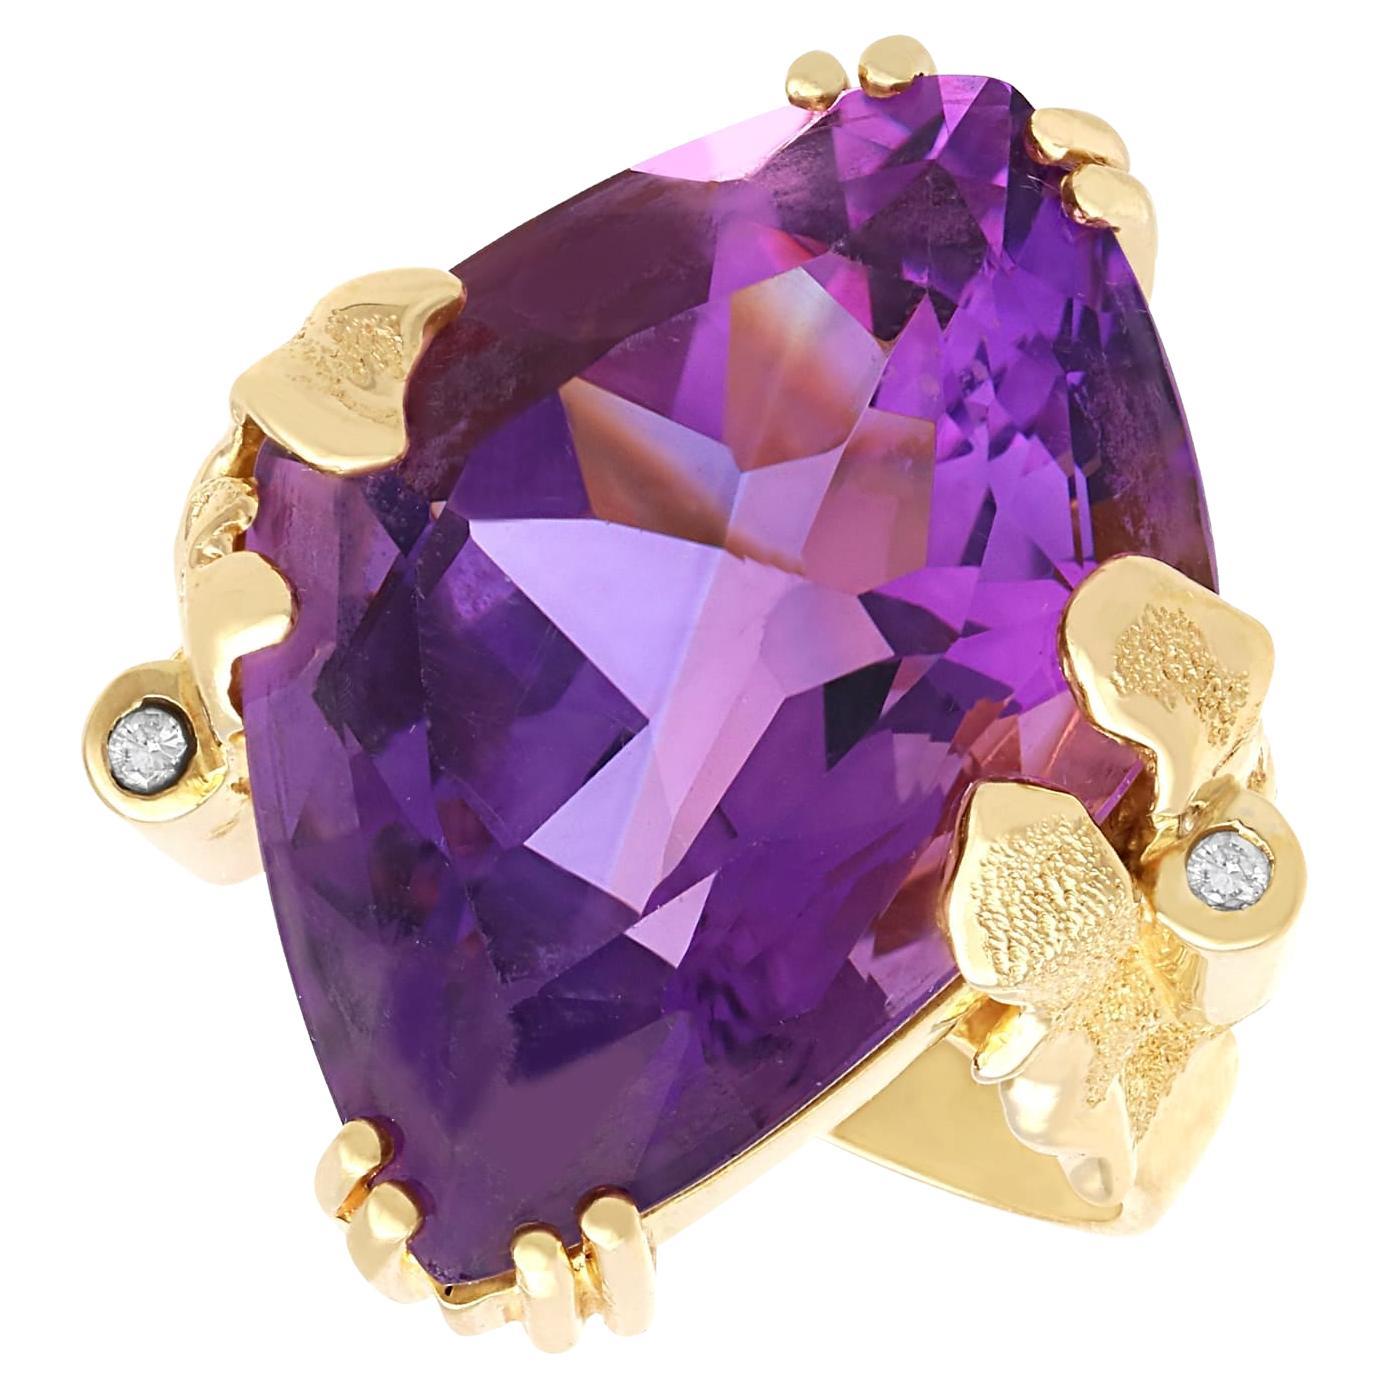 Vintage 28.83ct Amethyst and 0.06ct Diamond, 14k Yellow Gold Dress Ring